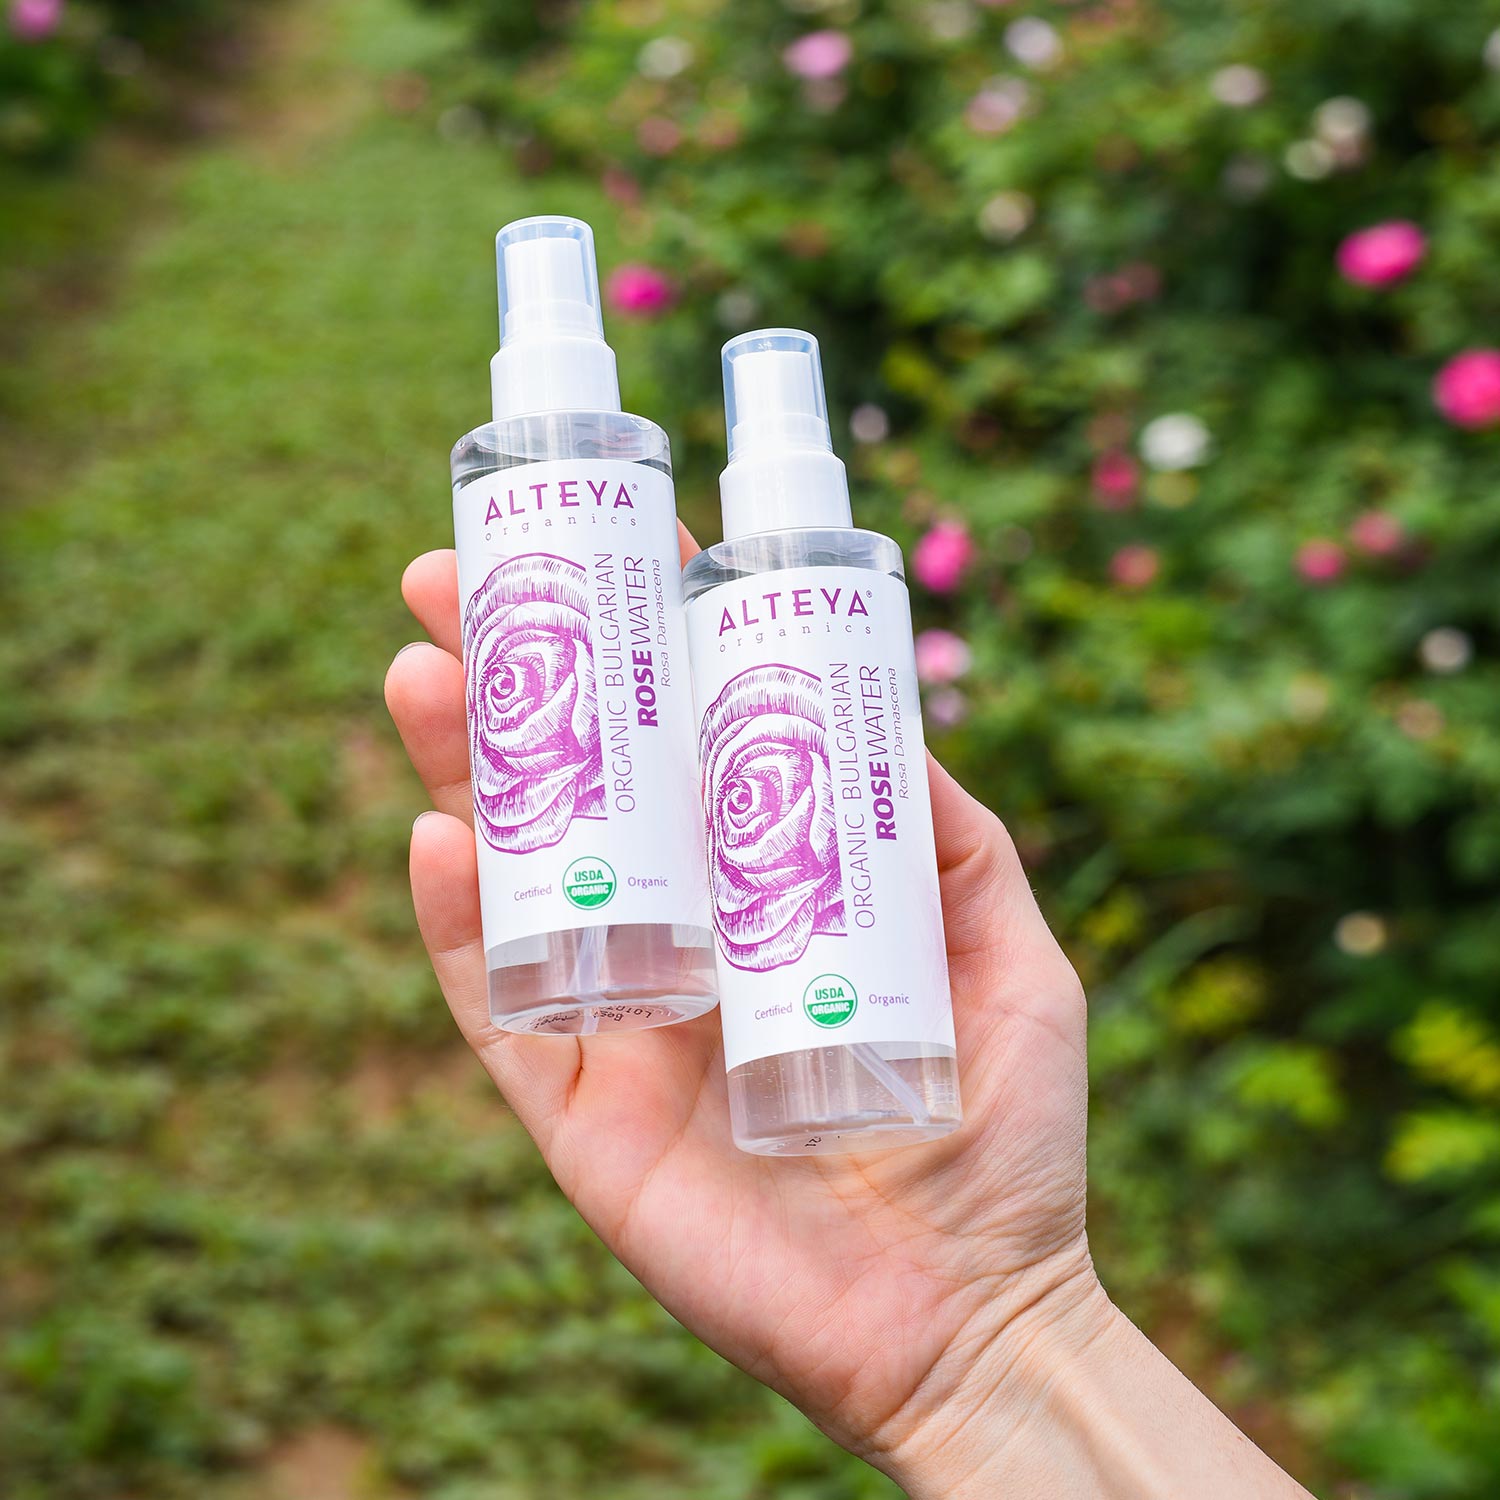 A hand holding two bottles of Alteya Organics Bulgarian Organic Rose Water - 3.4 Fl Oz Spray, providing hydration to the skin, in front of a field of roses.